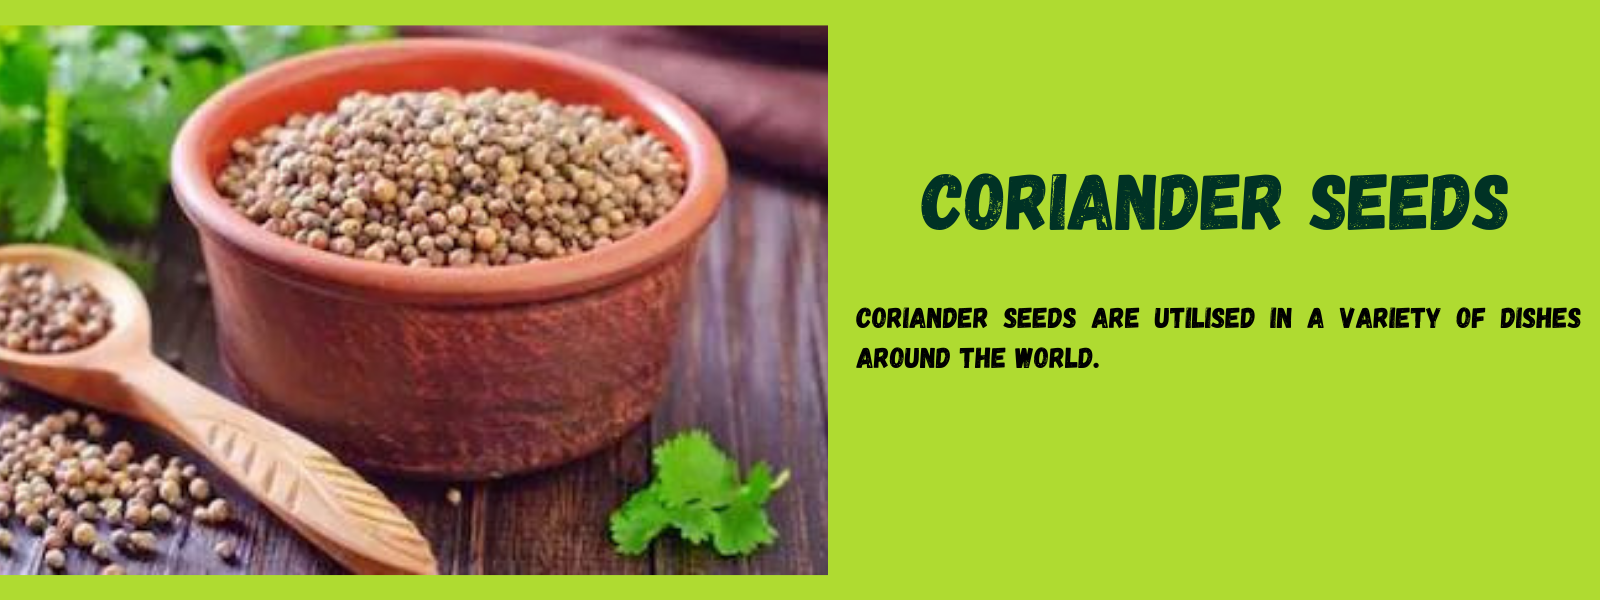 Coriander Seeds - Health Benefits, Uses and Important Facts